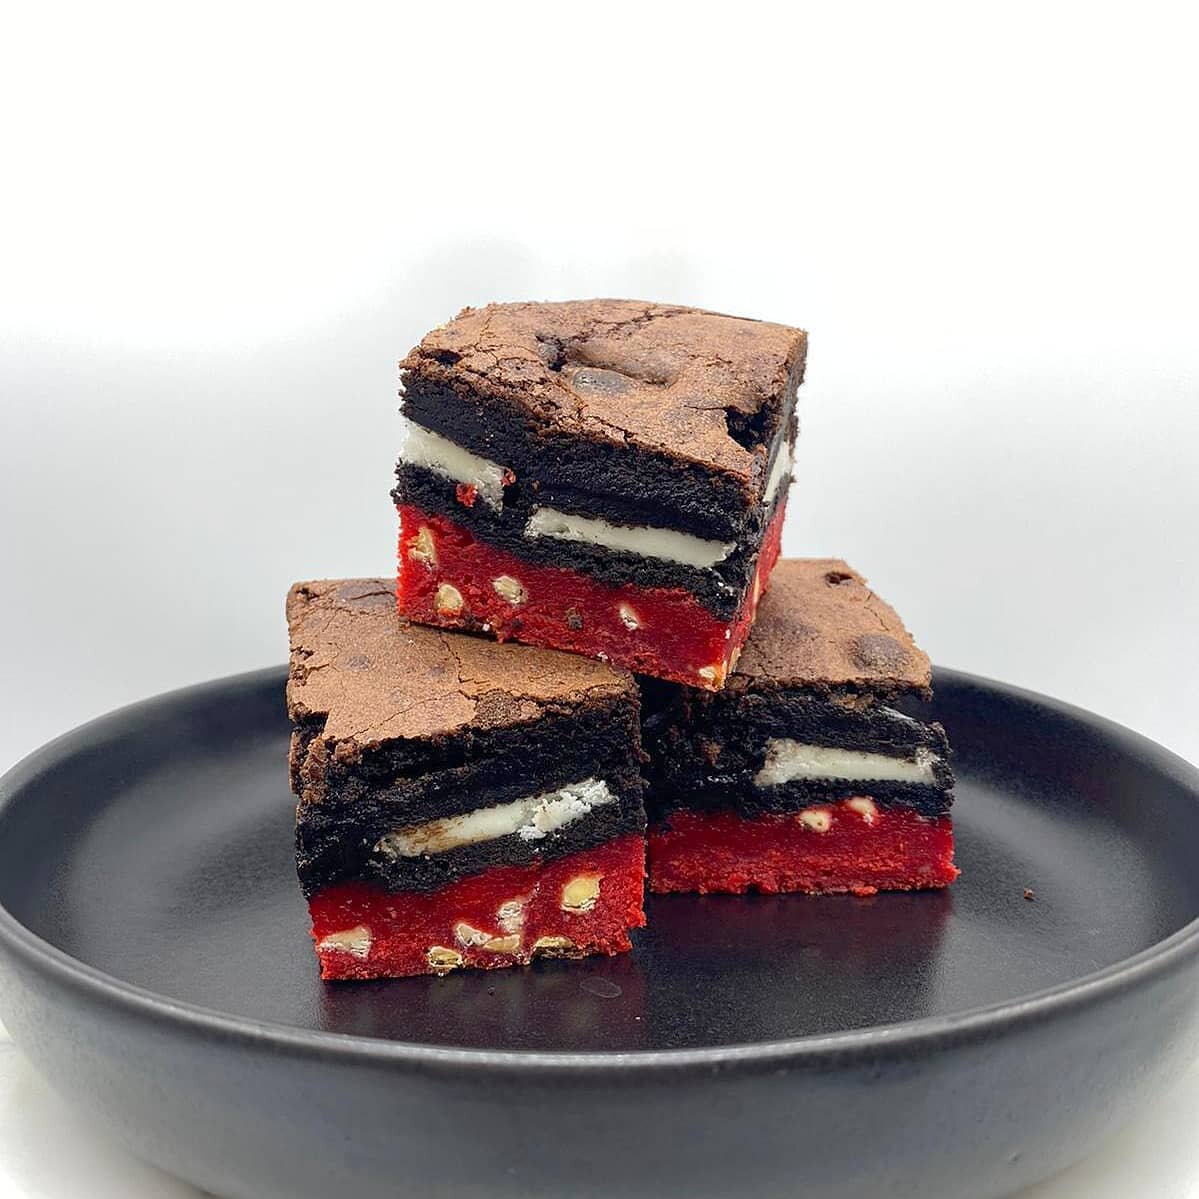 Red velvet cookie dough Oreo brownies, I think that's all of it! Blimey, these sexy brownies have it all, and bells on!
⭐Order now!⭐
Will be available for national postage soon on the website too! 🥳
.
.
#redvelvetcookies #cookiedough #sluttybrownie 